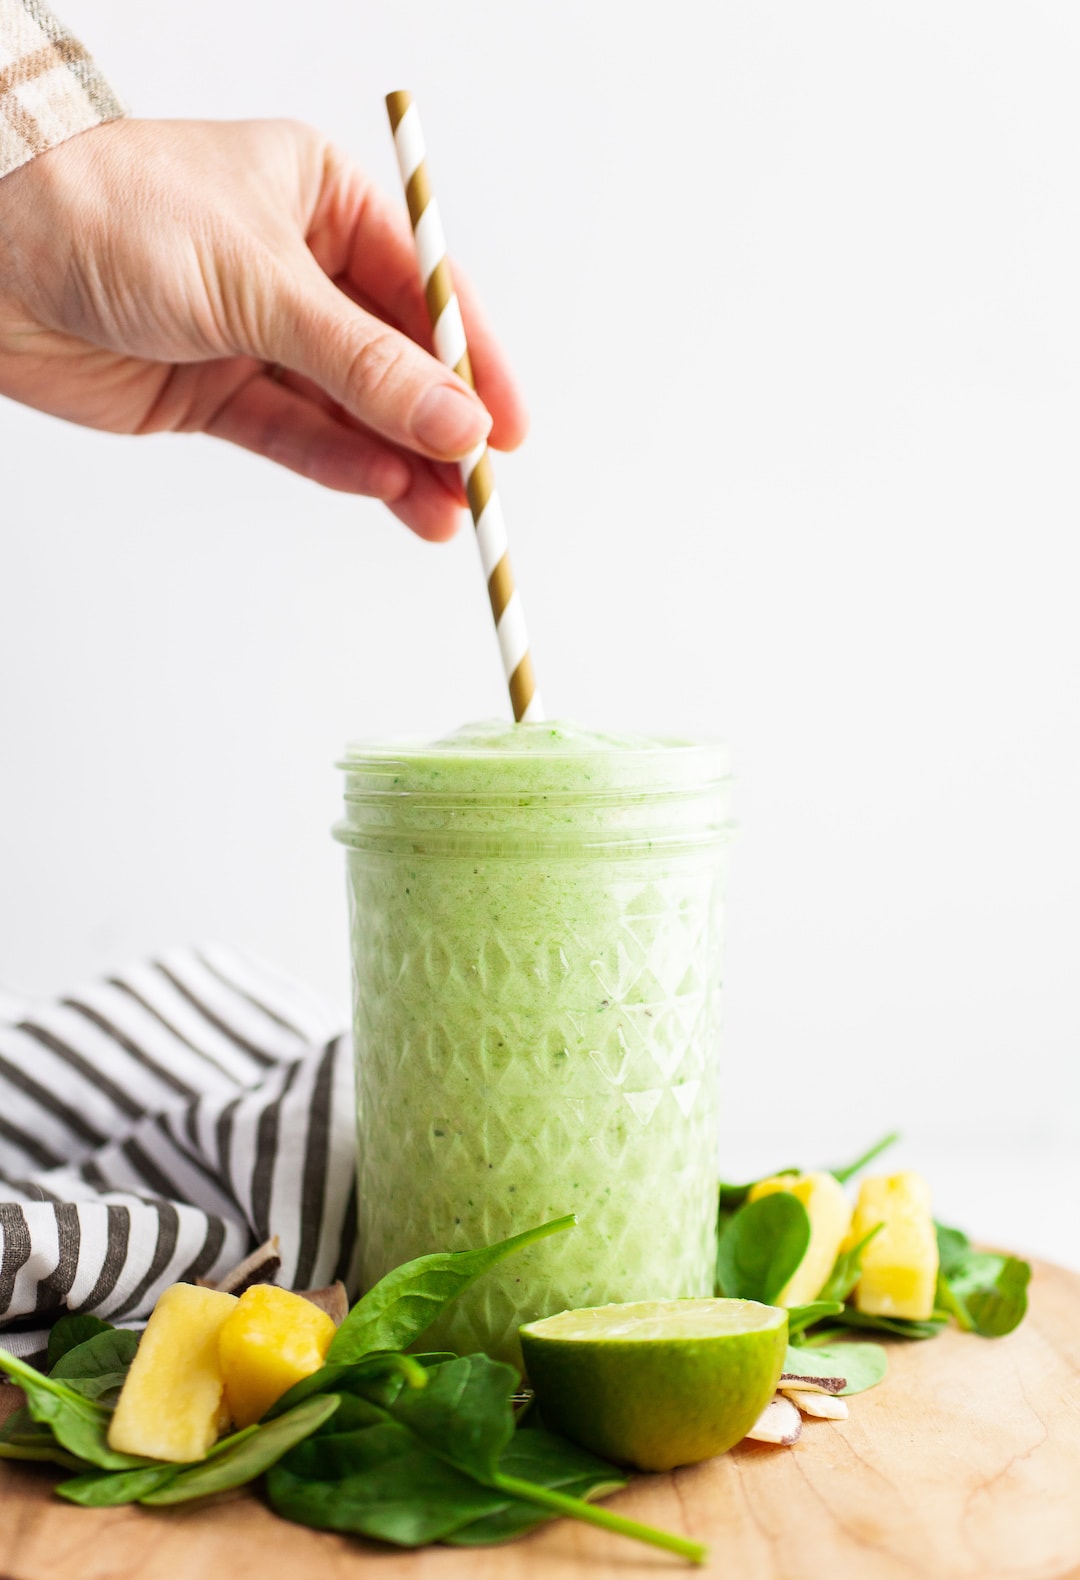 A Pineapple Weight Loss Smoothie with Balance in Mind